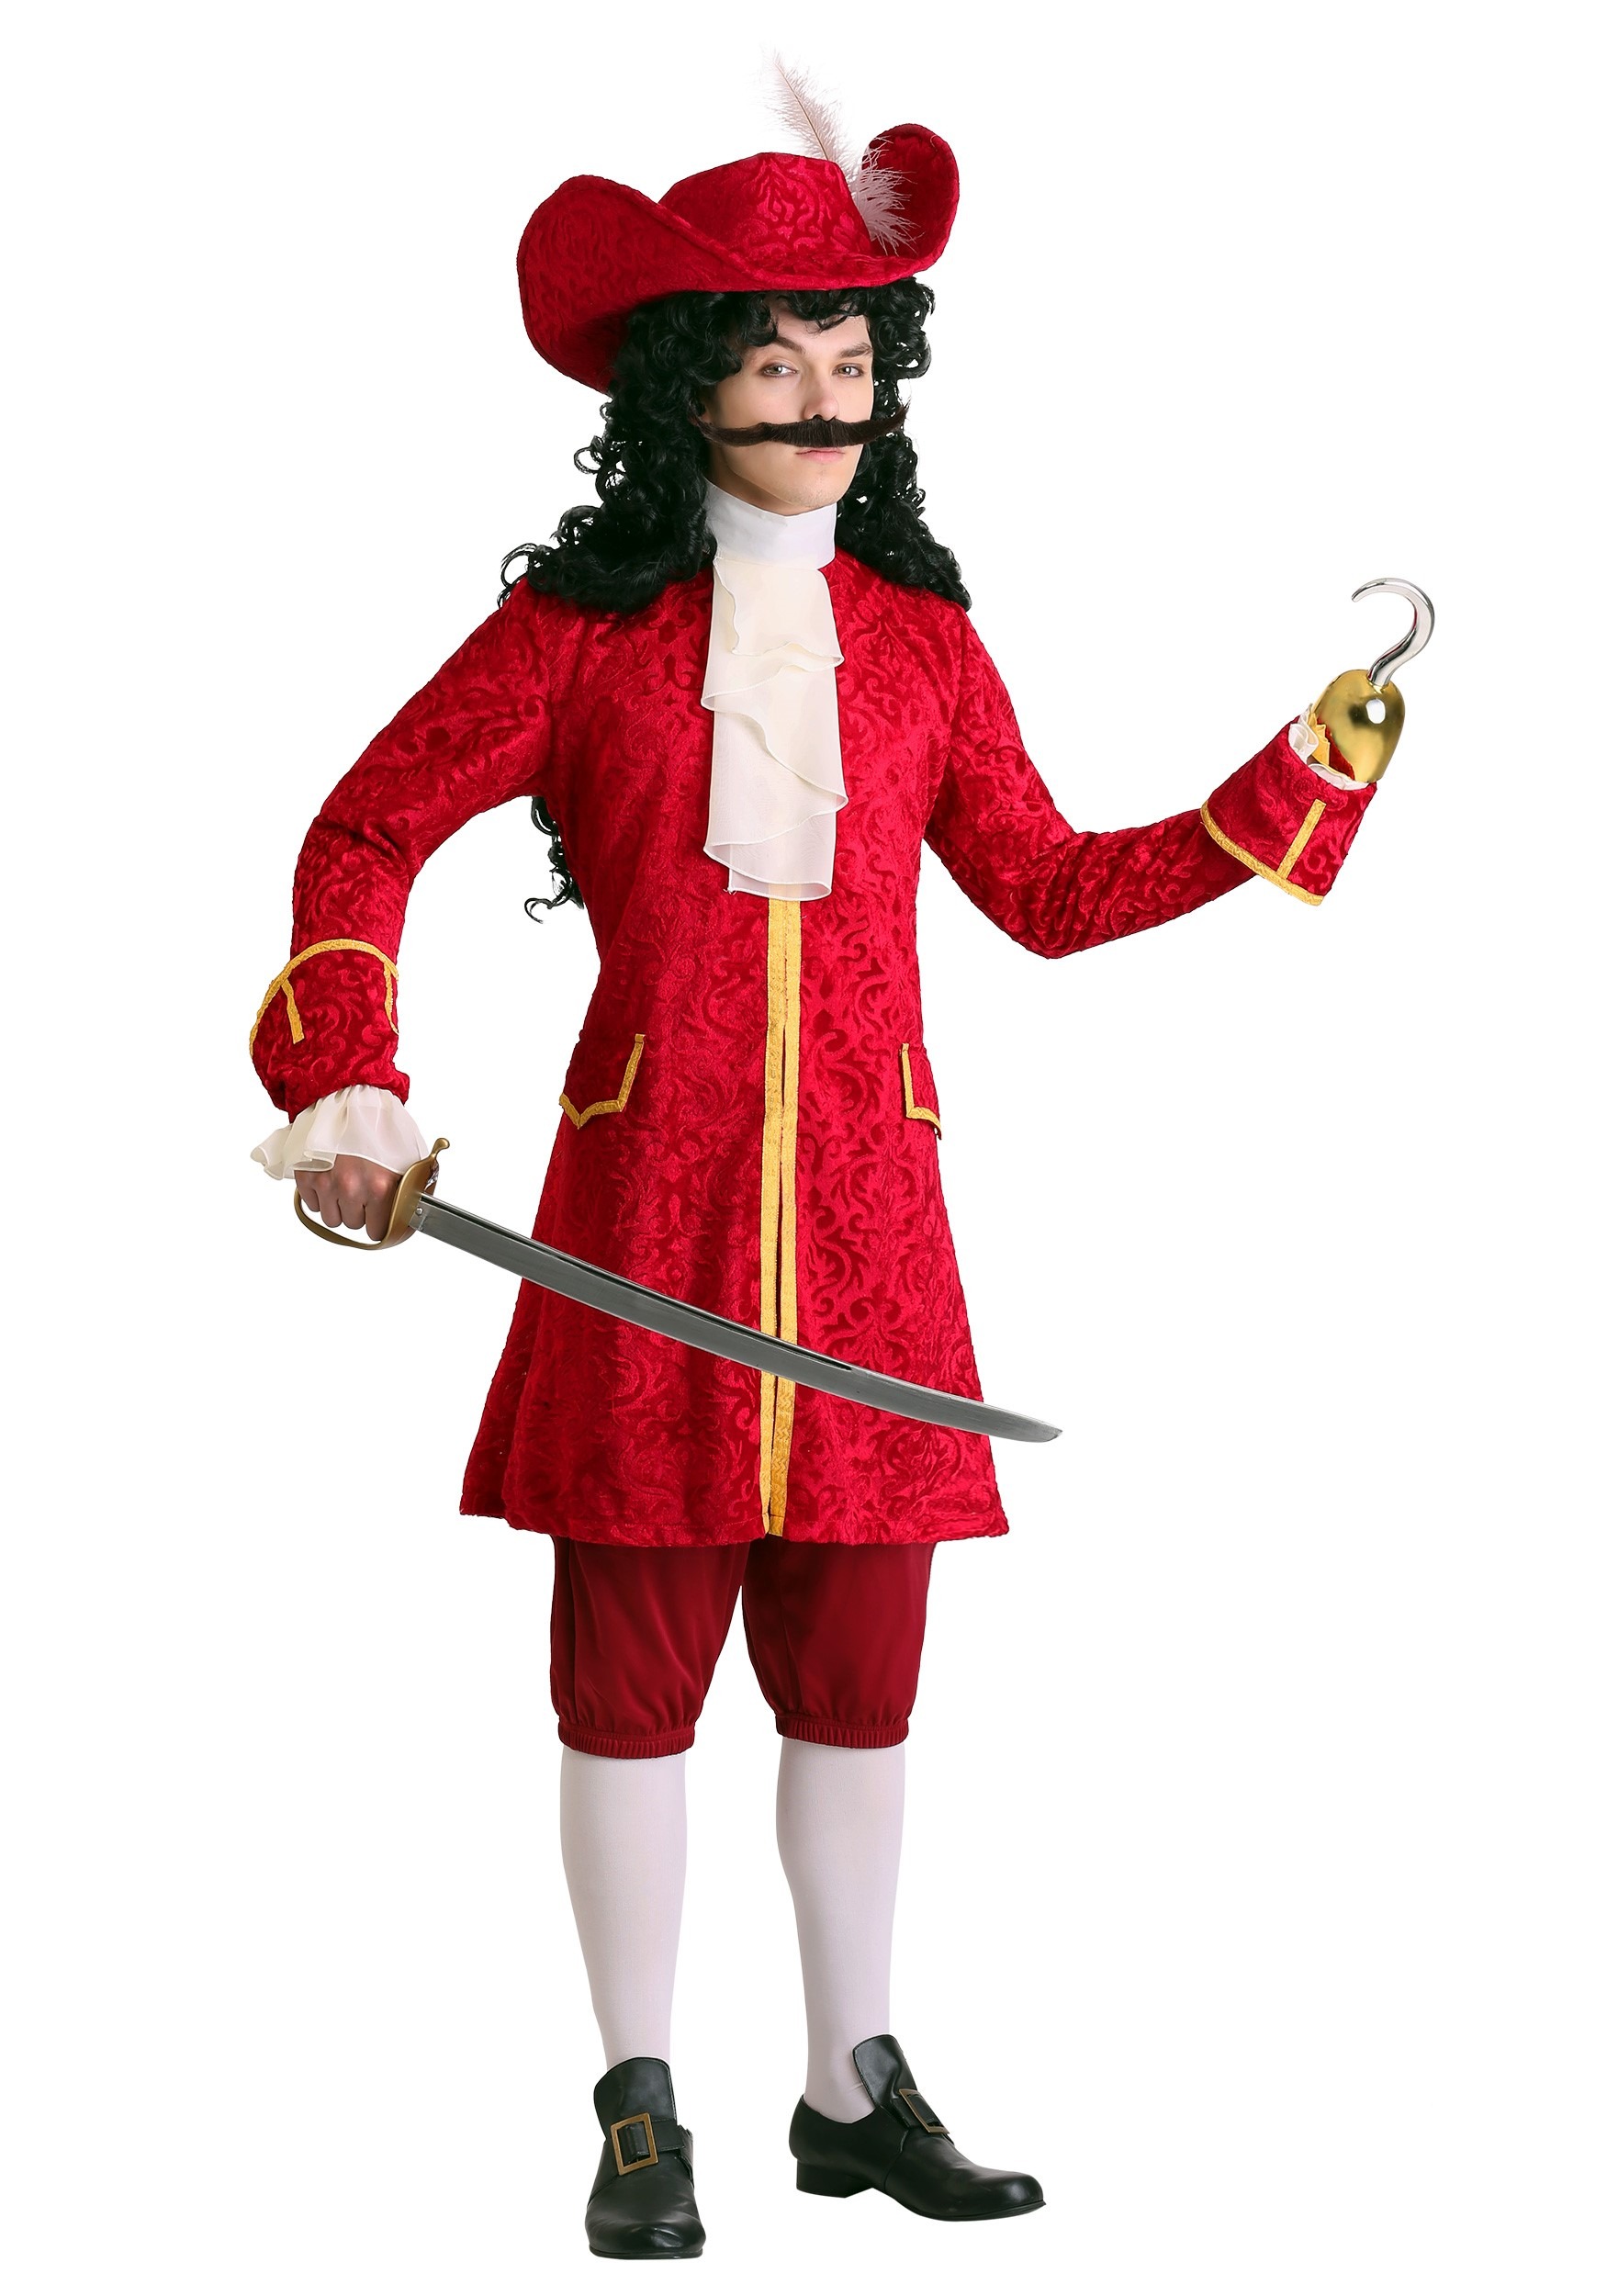 https://images.halloweencostumes.ca/products/46194/1-1/adults-privateer-pirate-costume.jpg